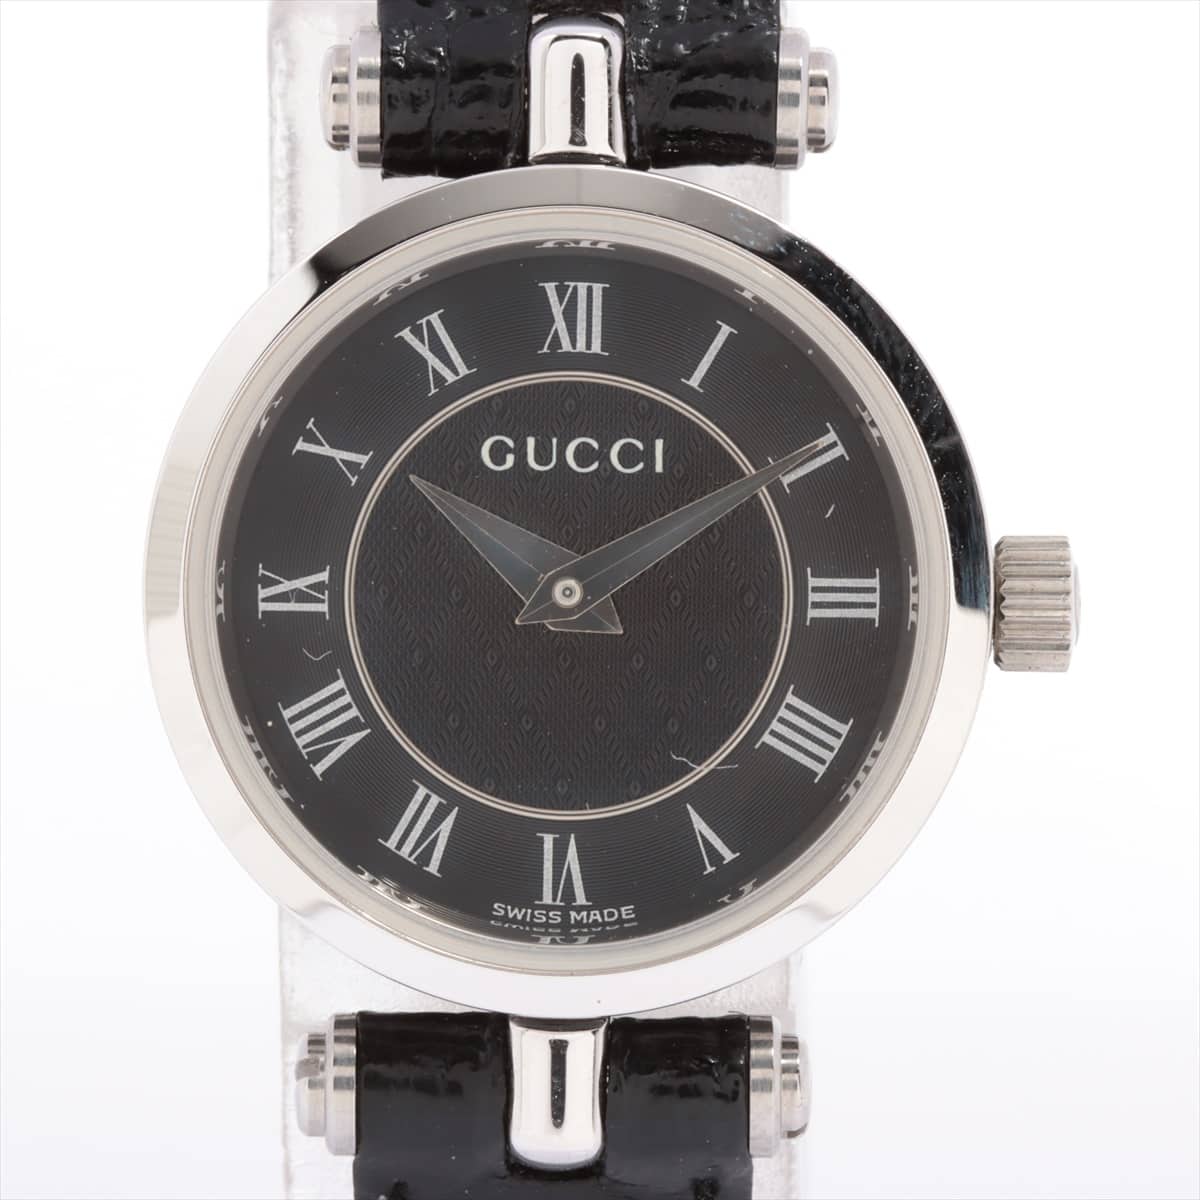 Gucci Round 2040L SS & Leather QZ Black-Face